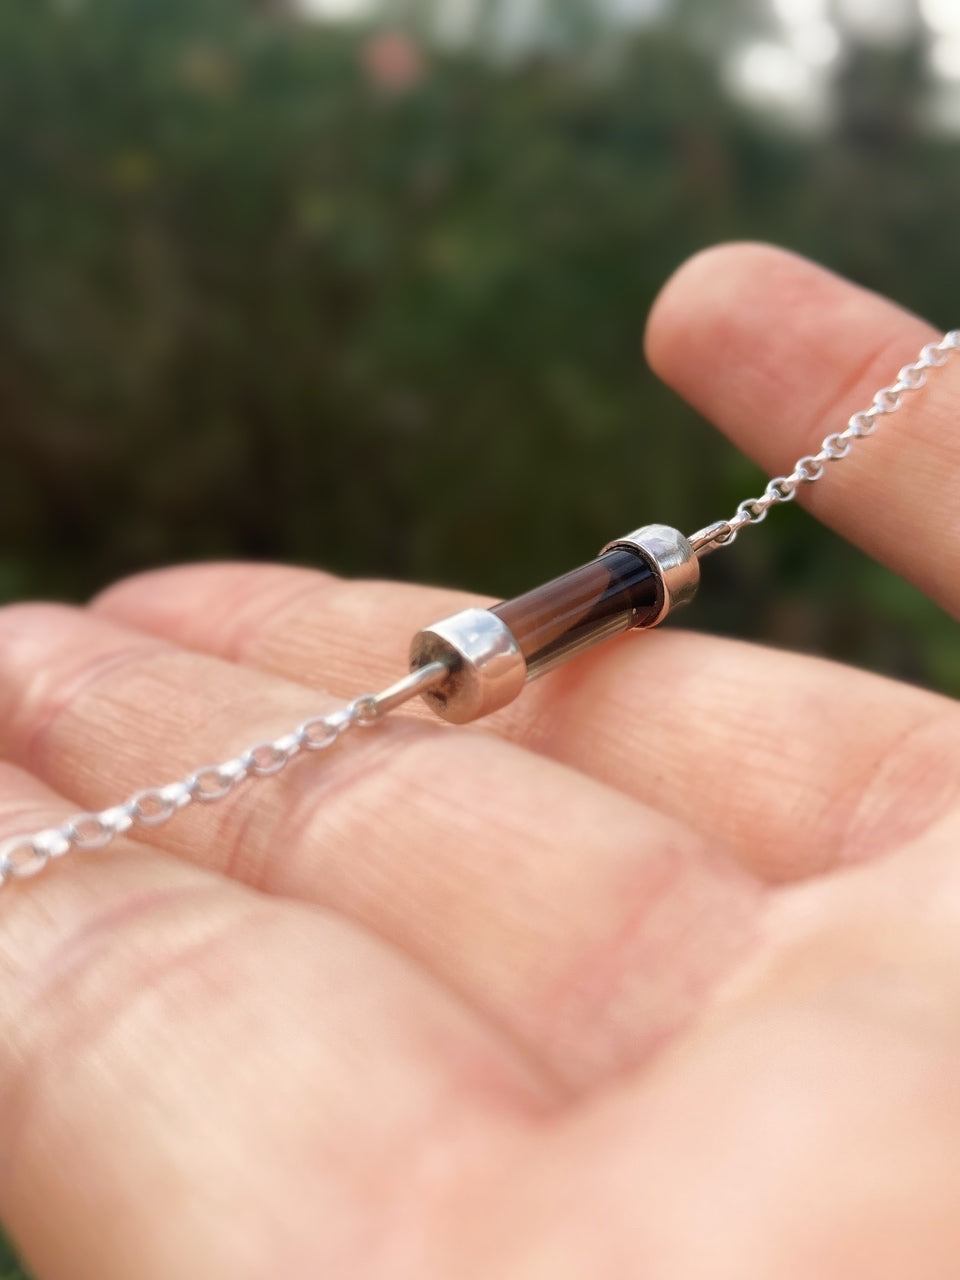 PROTECTION SPELL VIAL Handmade Sterling Silver Choker Necklace with Smokey Quartz